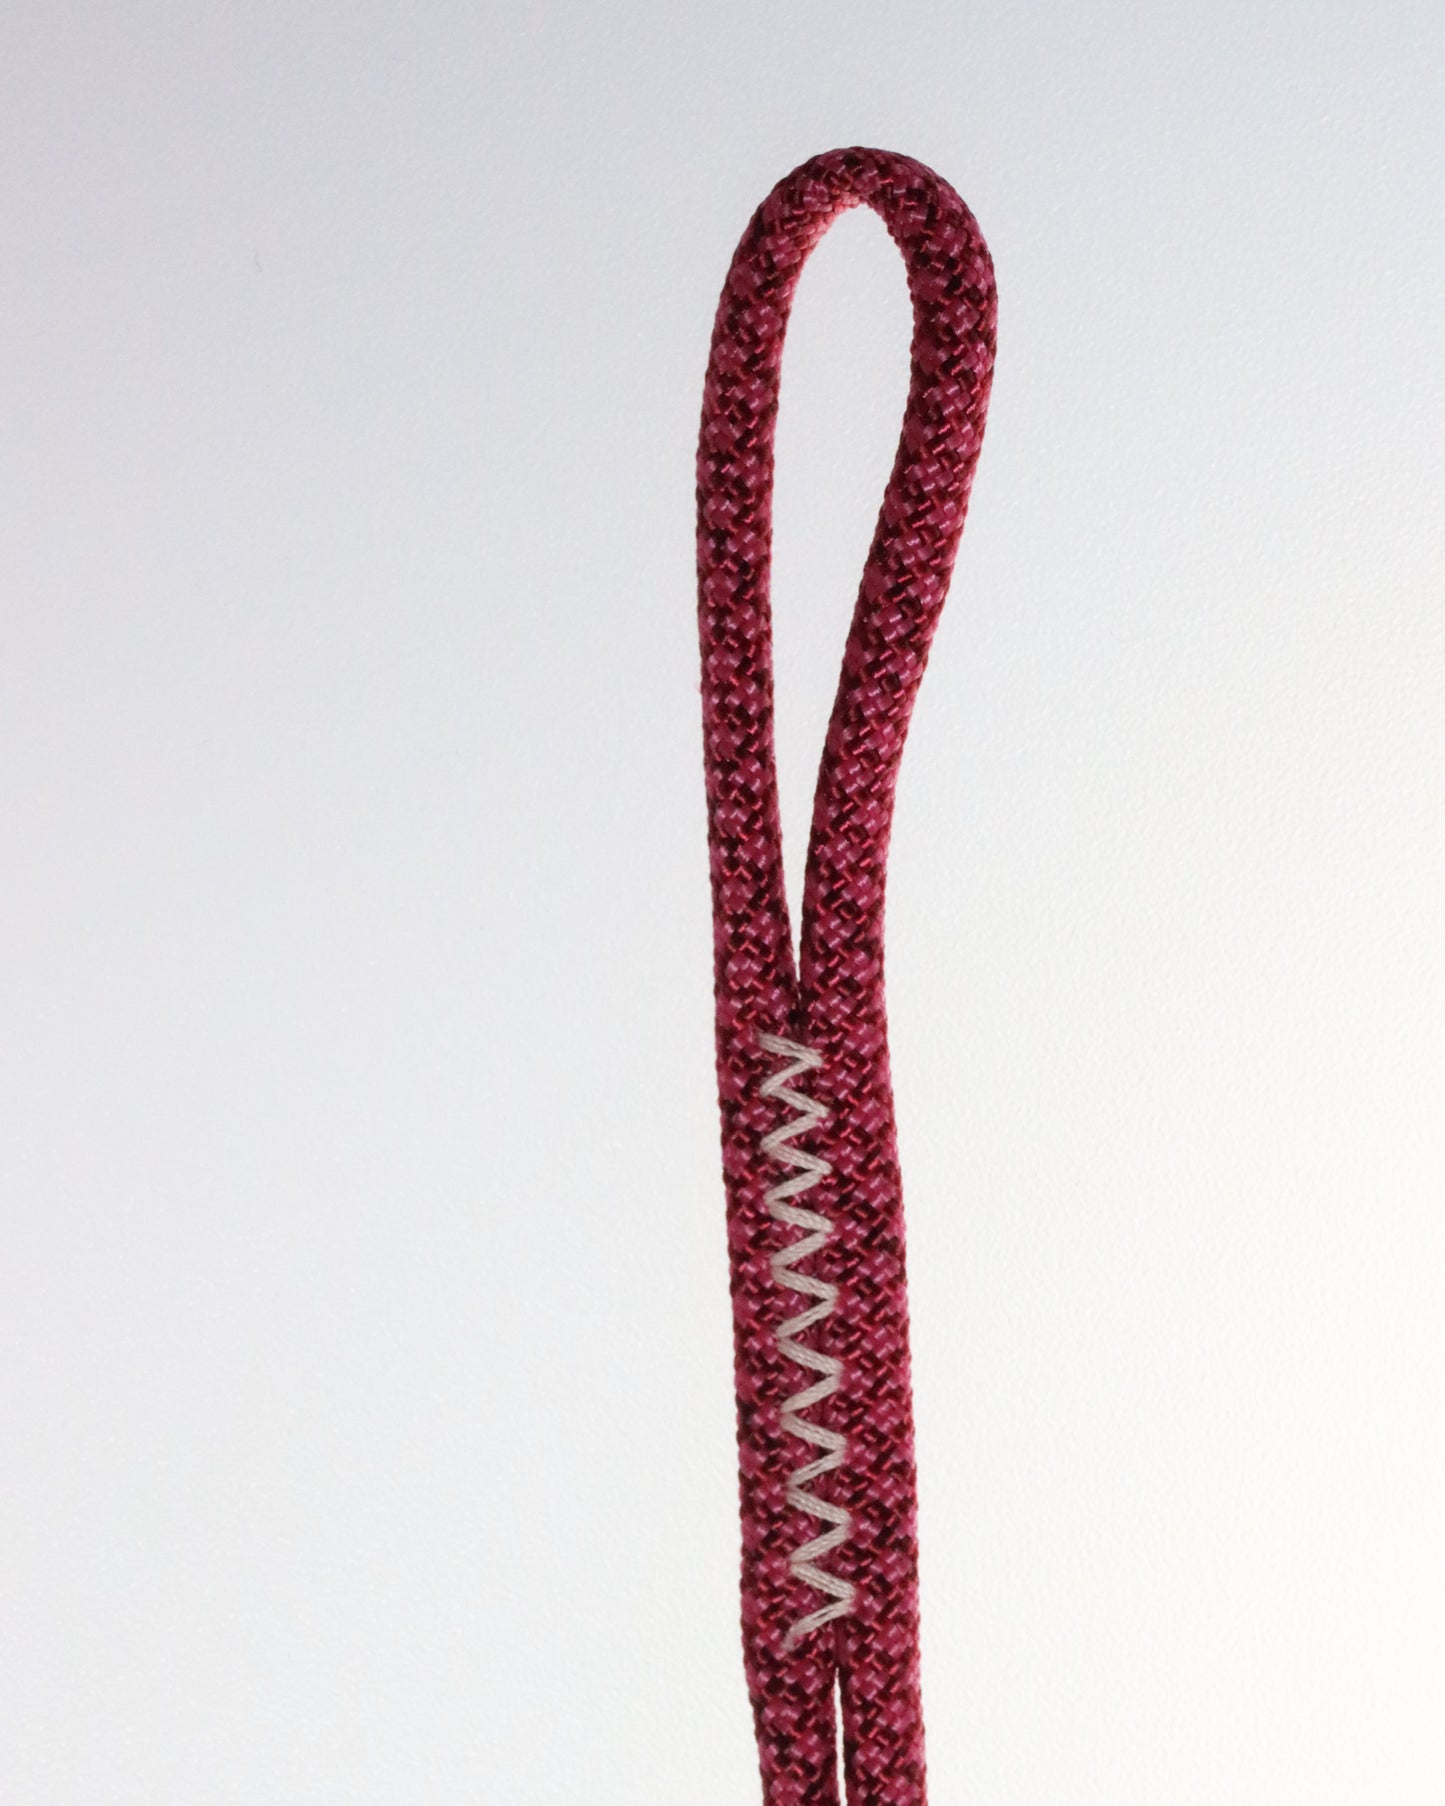 U.BAG Strap Extension made from paracord in color Burgundy